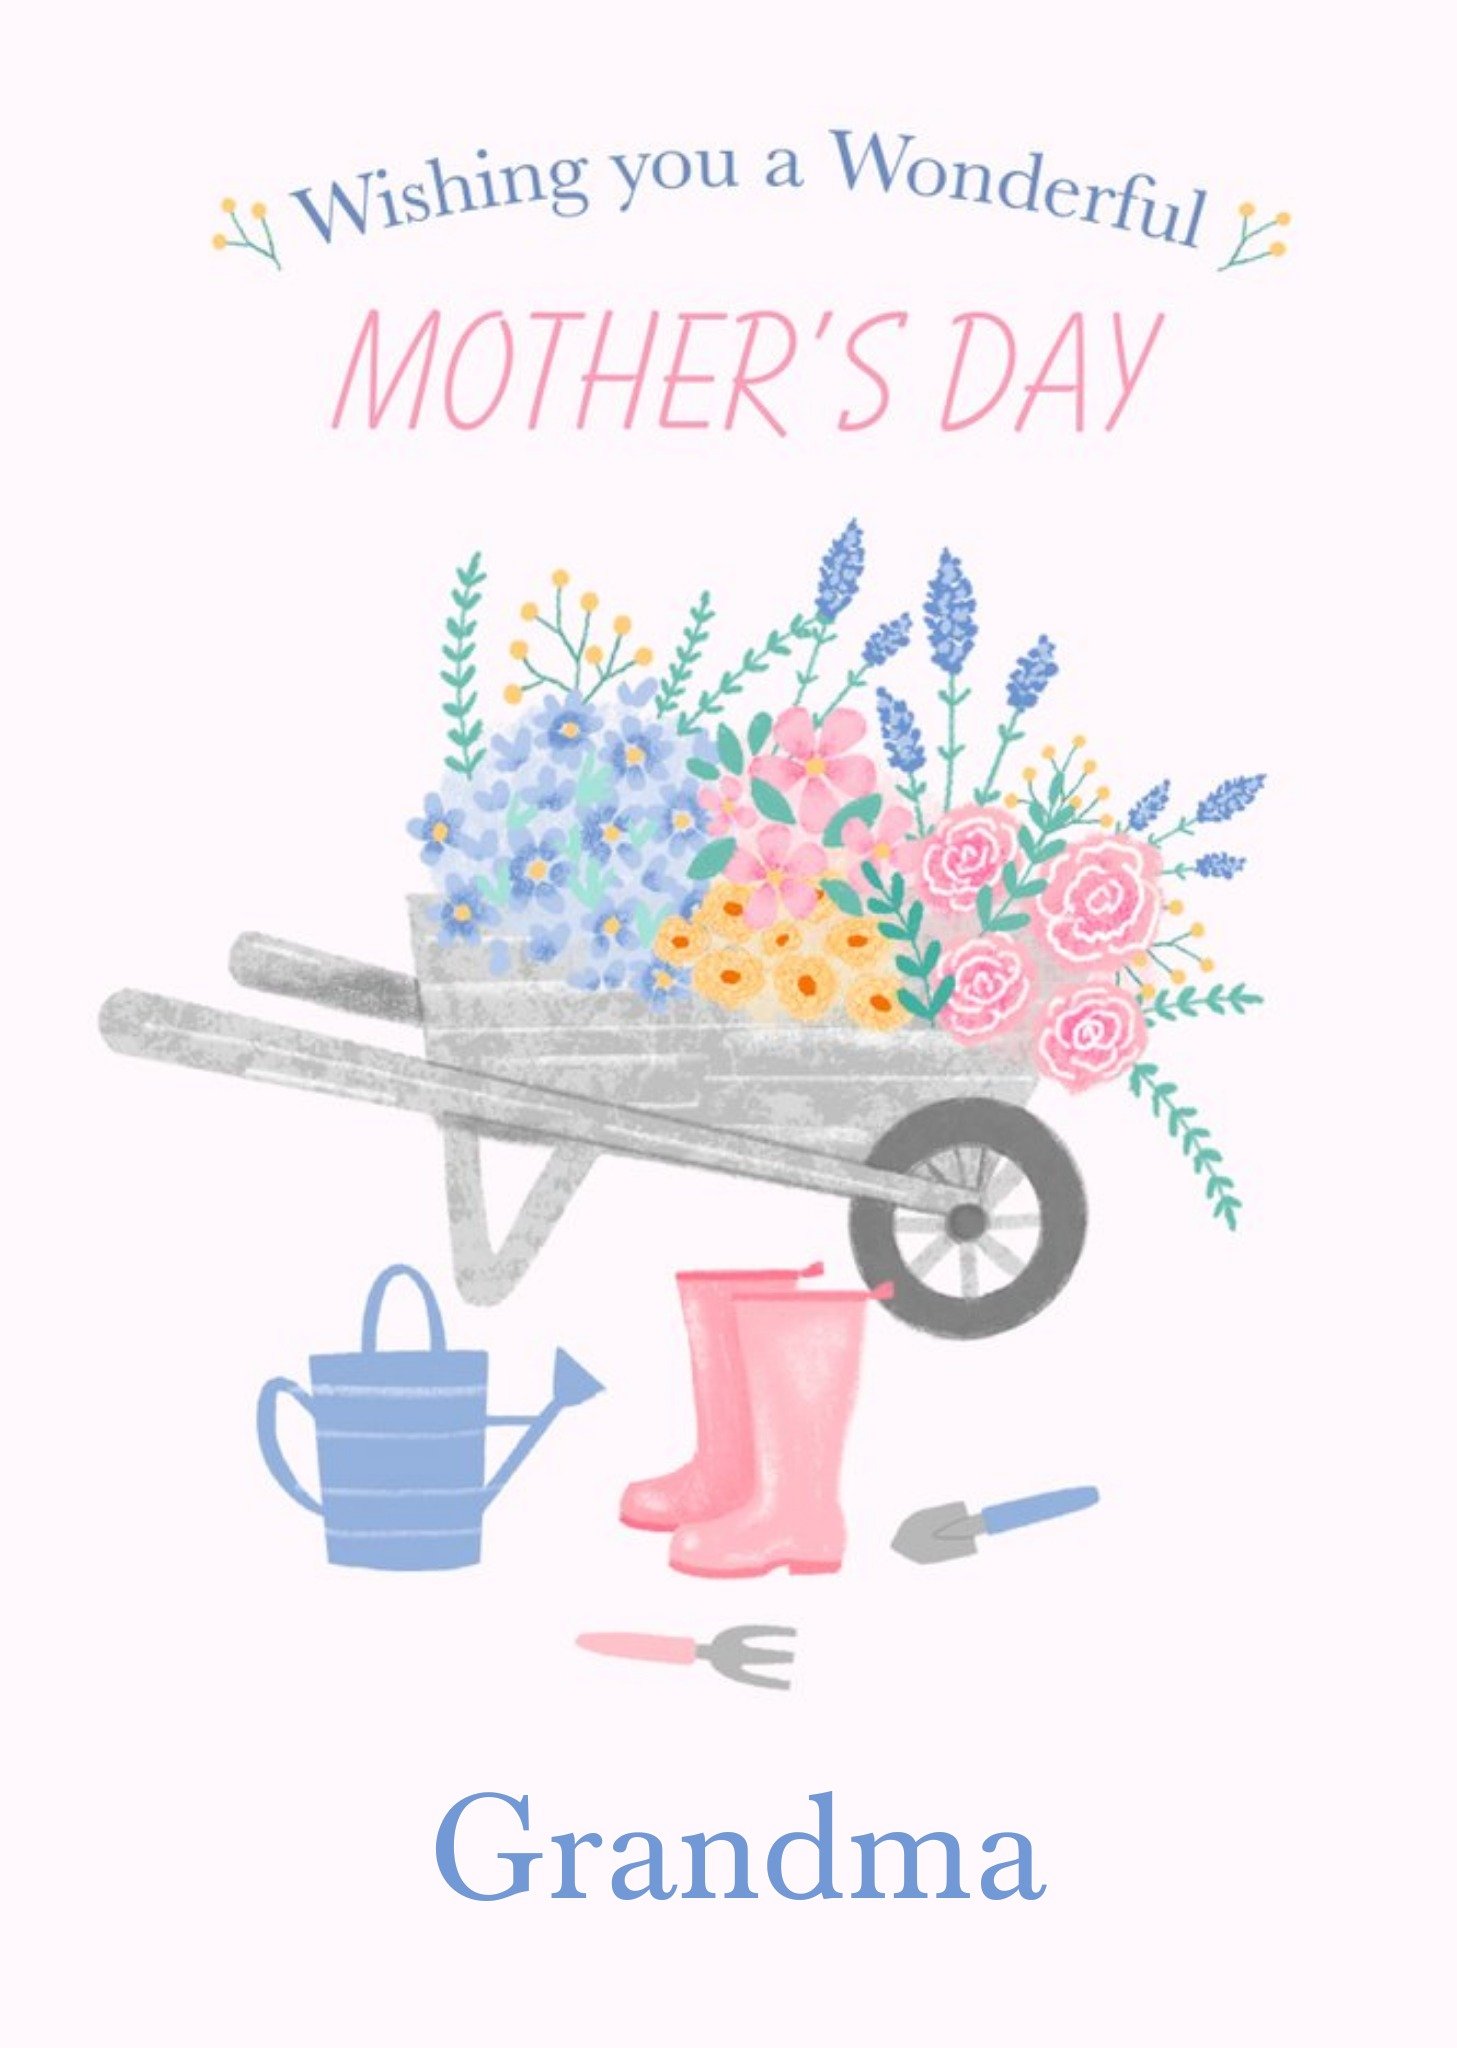 Moonpig Illustration Of A Wheelbarrow Filled With Flowers Wonderful Mother's Day Card, Large